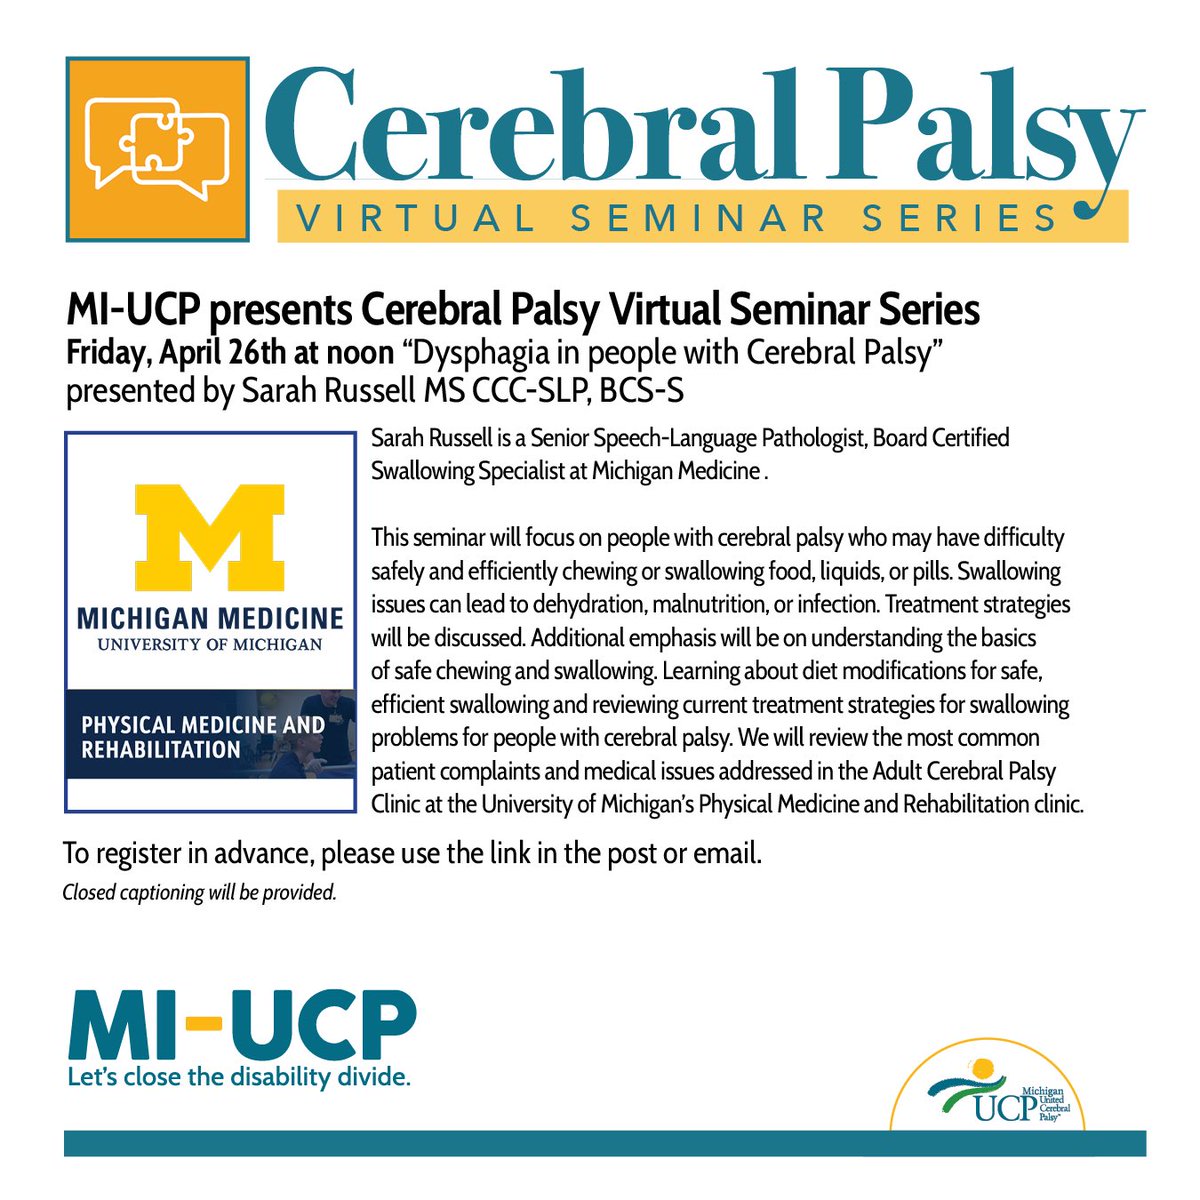 Make sure to join this weeks CP Seminar on “Dysphagia in people with Cerebral Palsy” presented by Sarah Russell MS CCC-SLP, BCS-S. April 26 at noon. #miucp #closethedisabilitydivide #cpseminar 

us02web.zoom.us/webinar/regist…